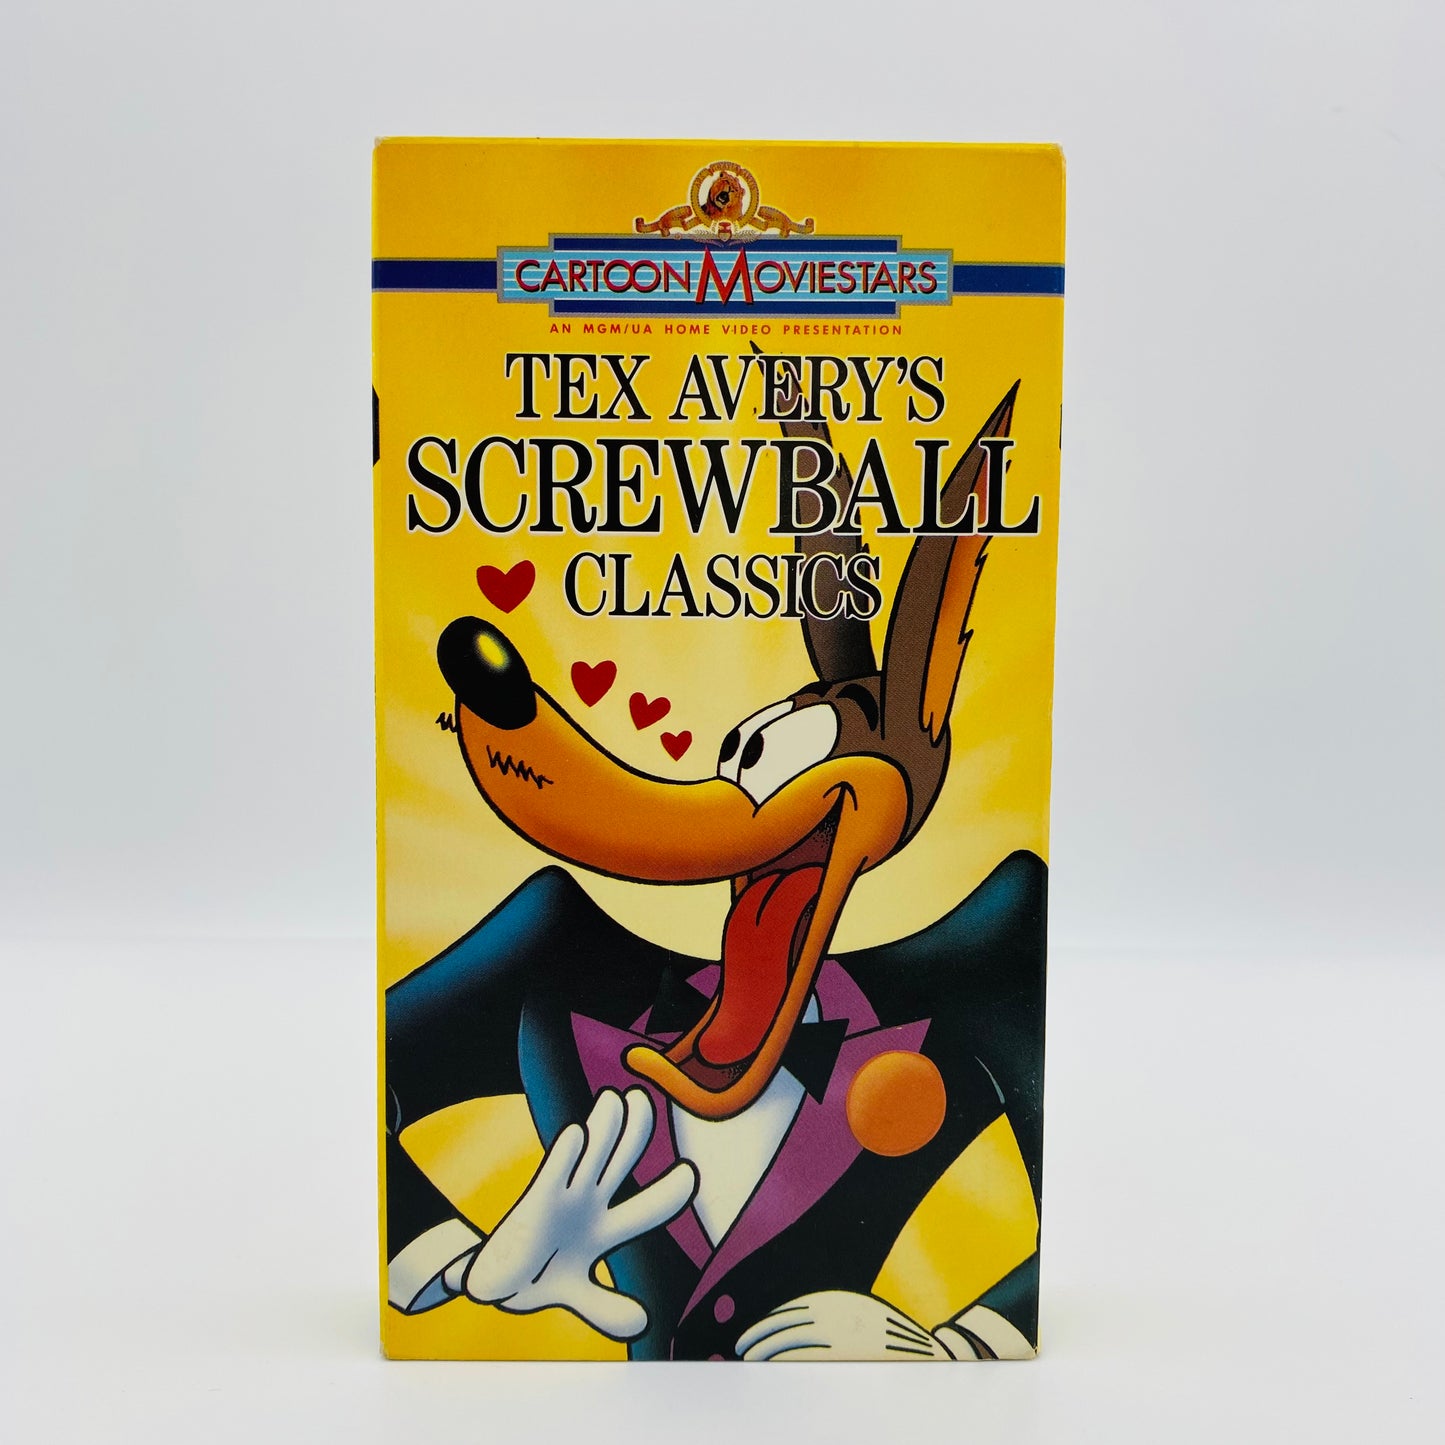 Tex Avery’s Screwball Classics volumes 1-4 VHS tapes (1988, 1989, 1991, 1992) MGM/UA Home Video